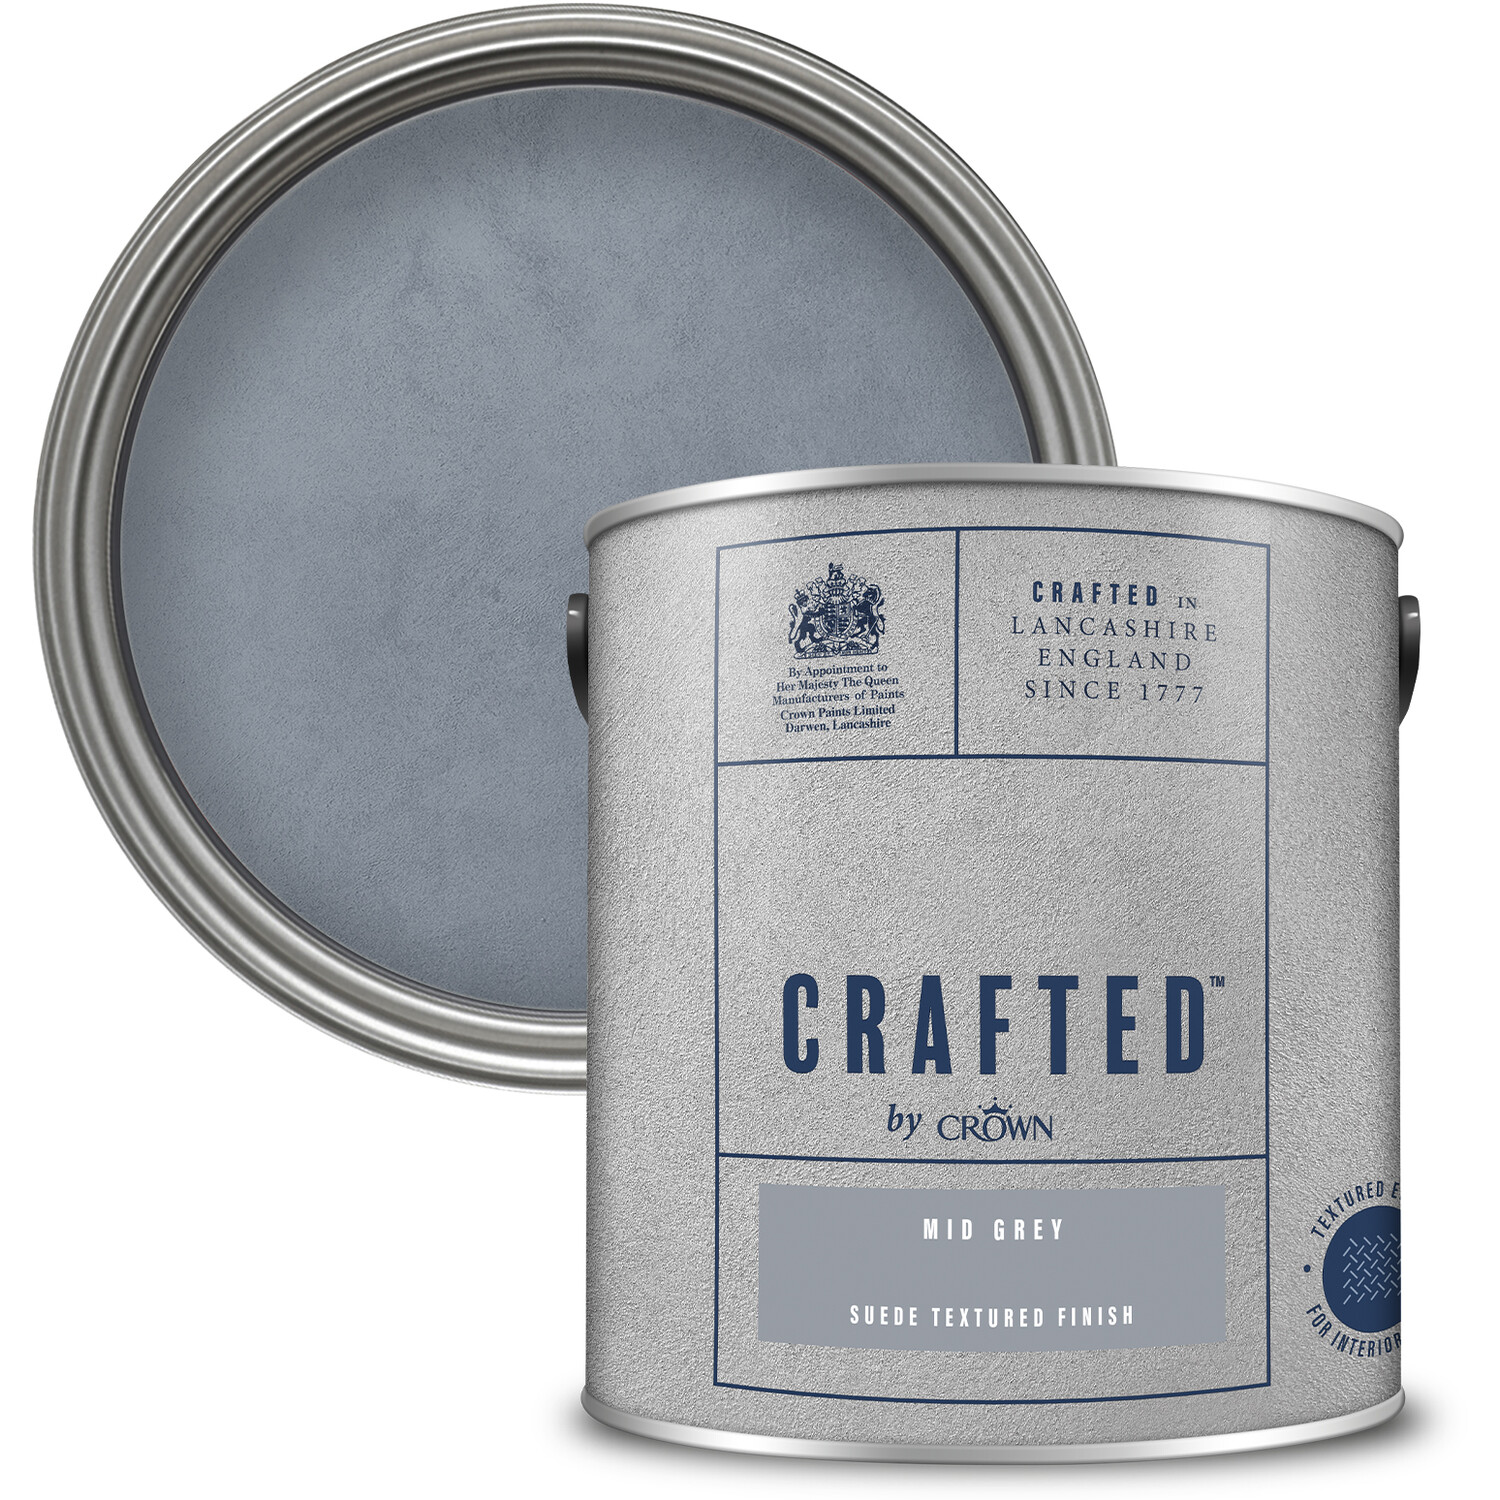 Crown Crafted Walls Mid Grey Suede Textured Finish Paint 2.5L Image 6